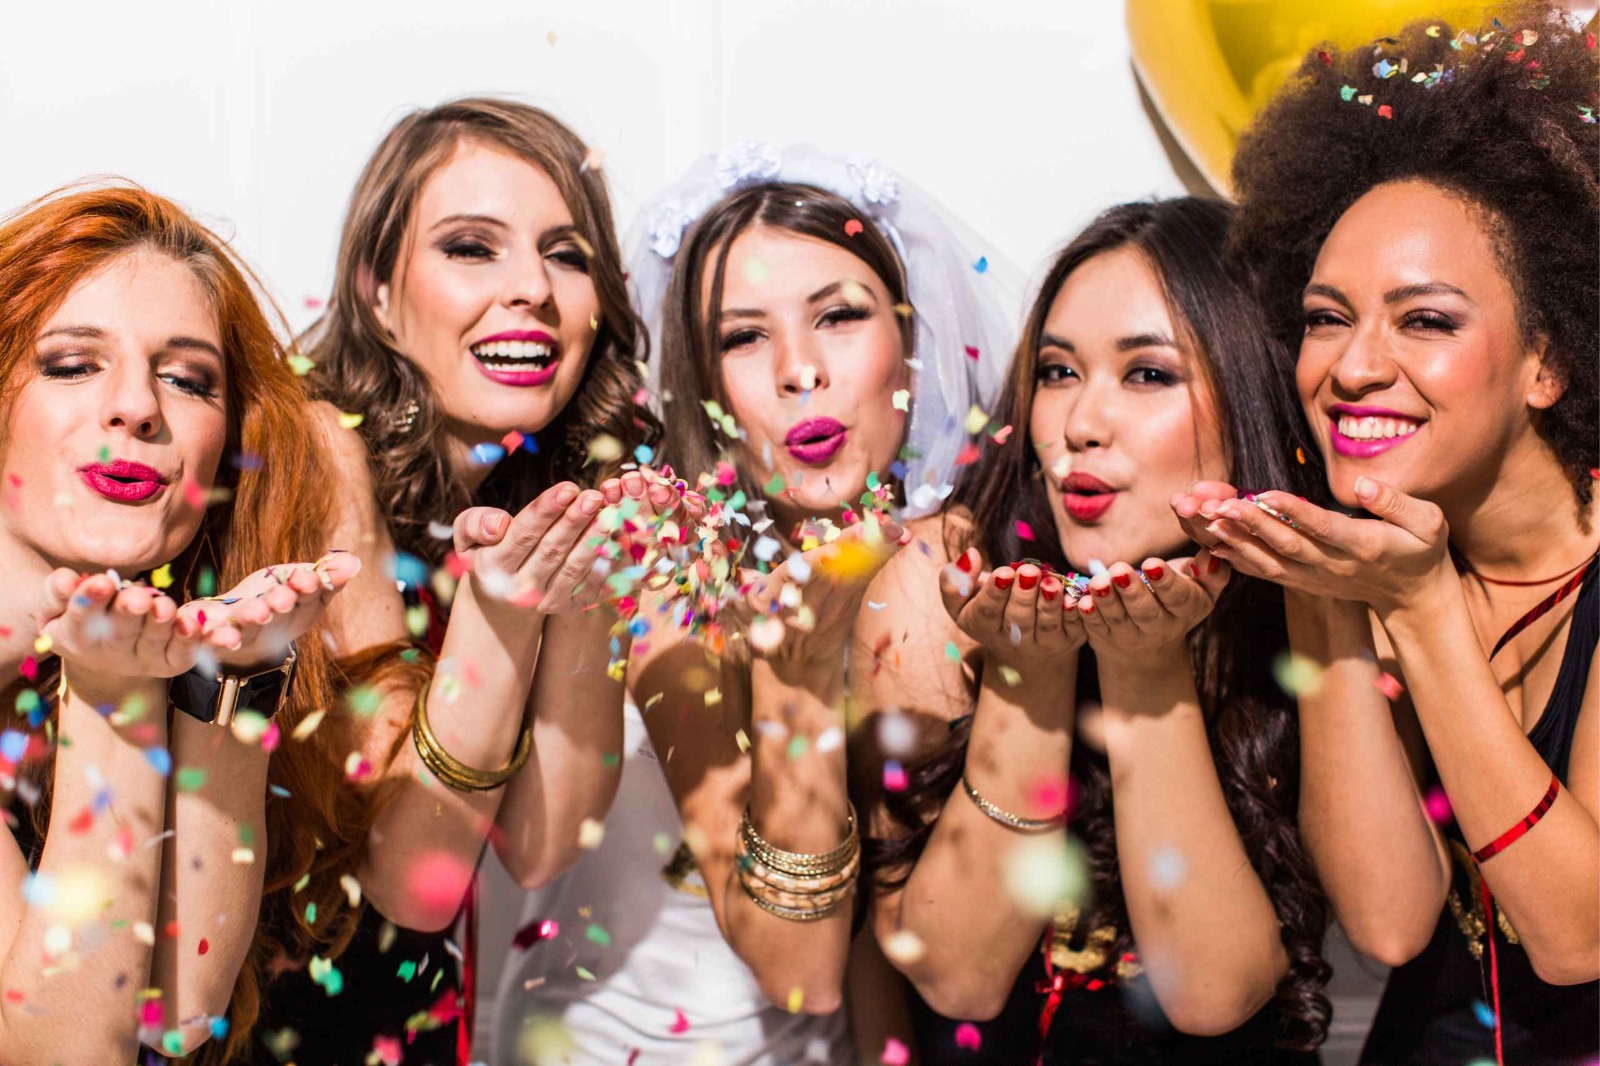 What to do at Charleston bachelorette party